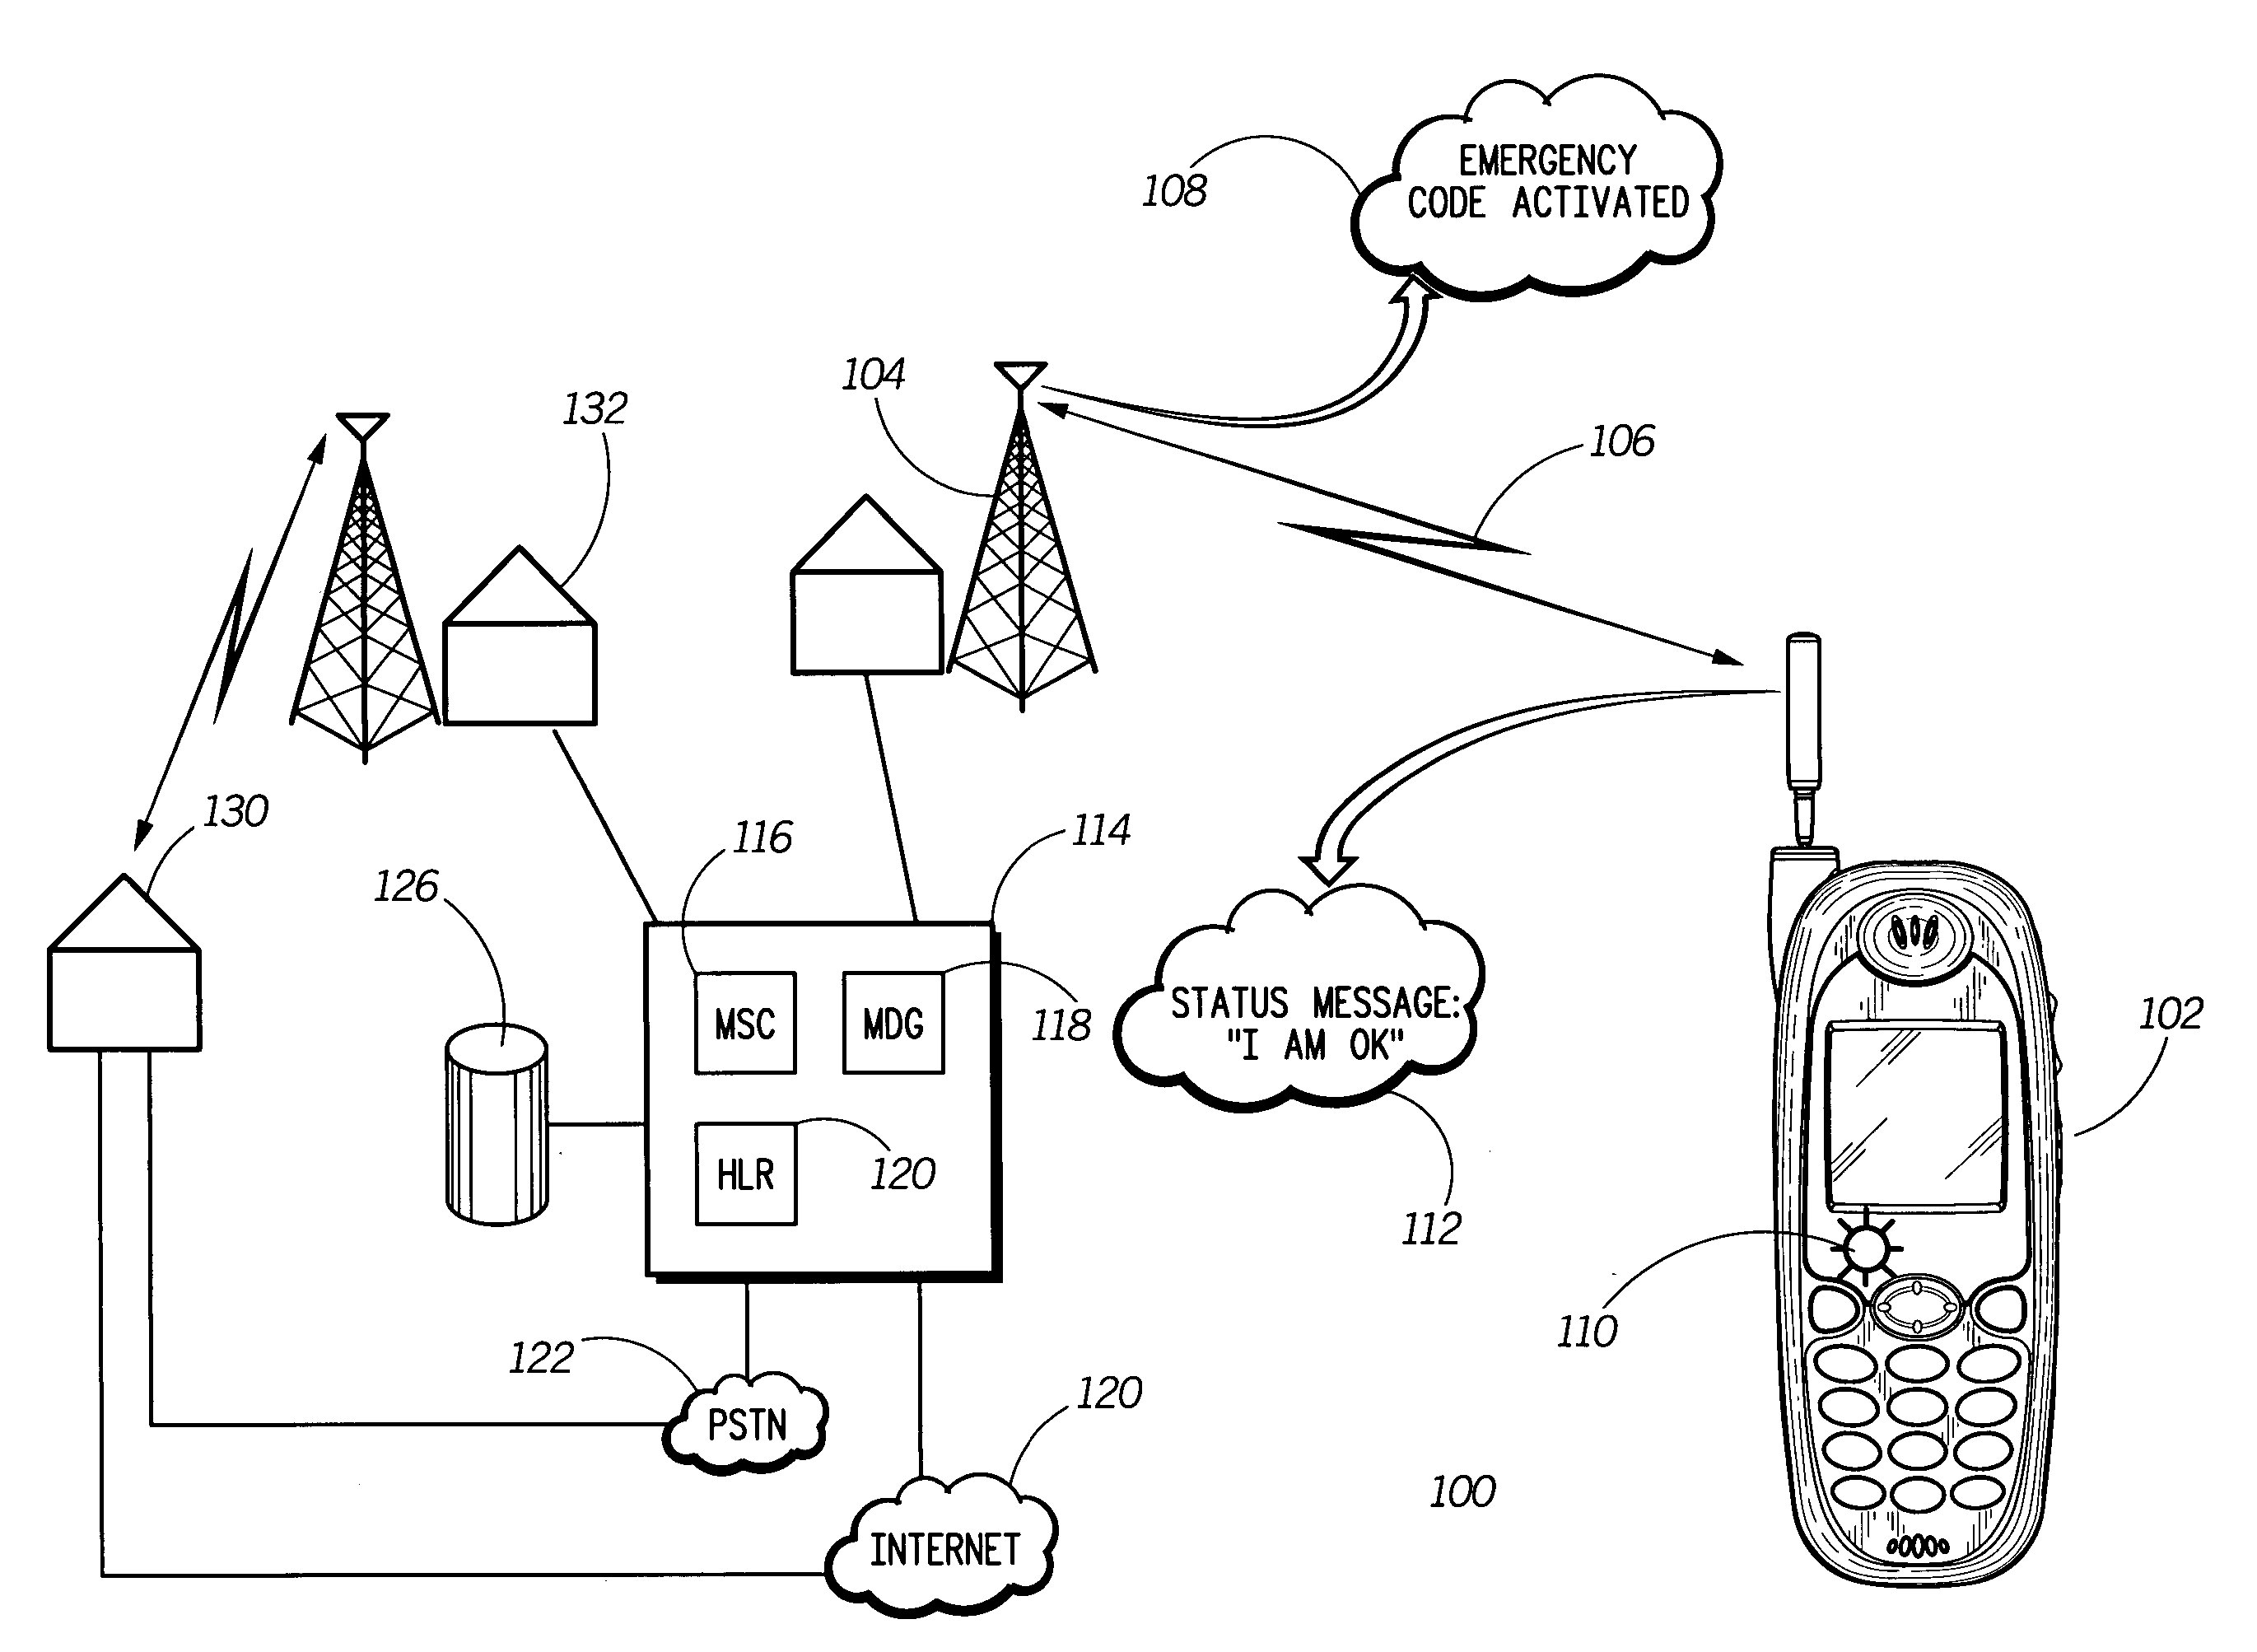 Method of operating a mobile communication device and mobile communication system during an emergency situation